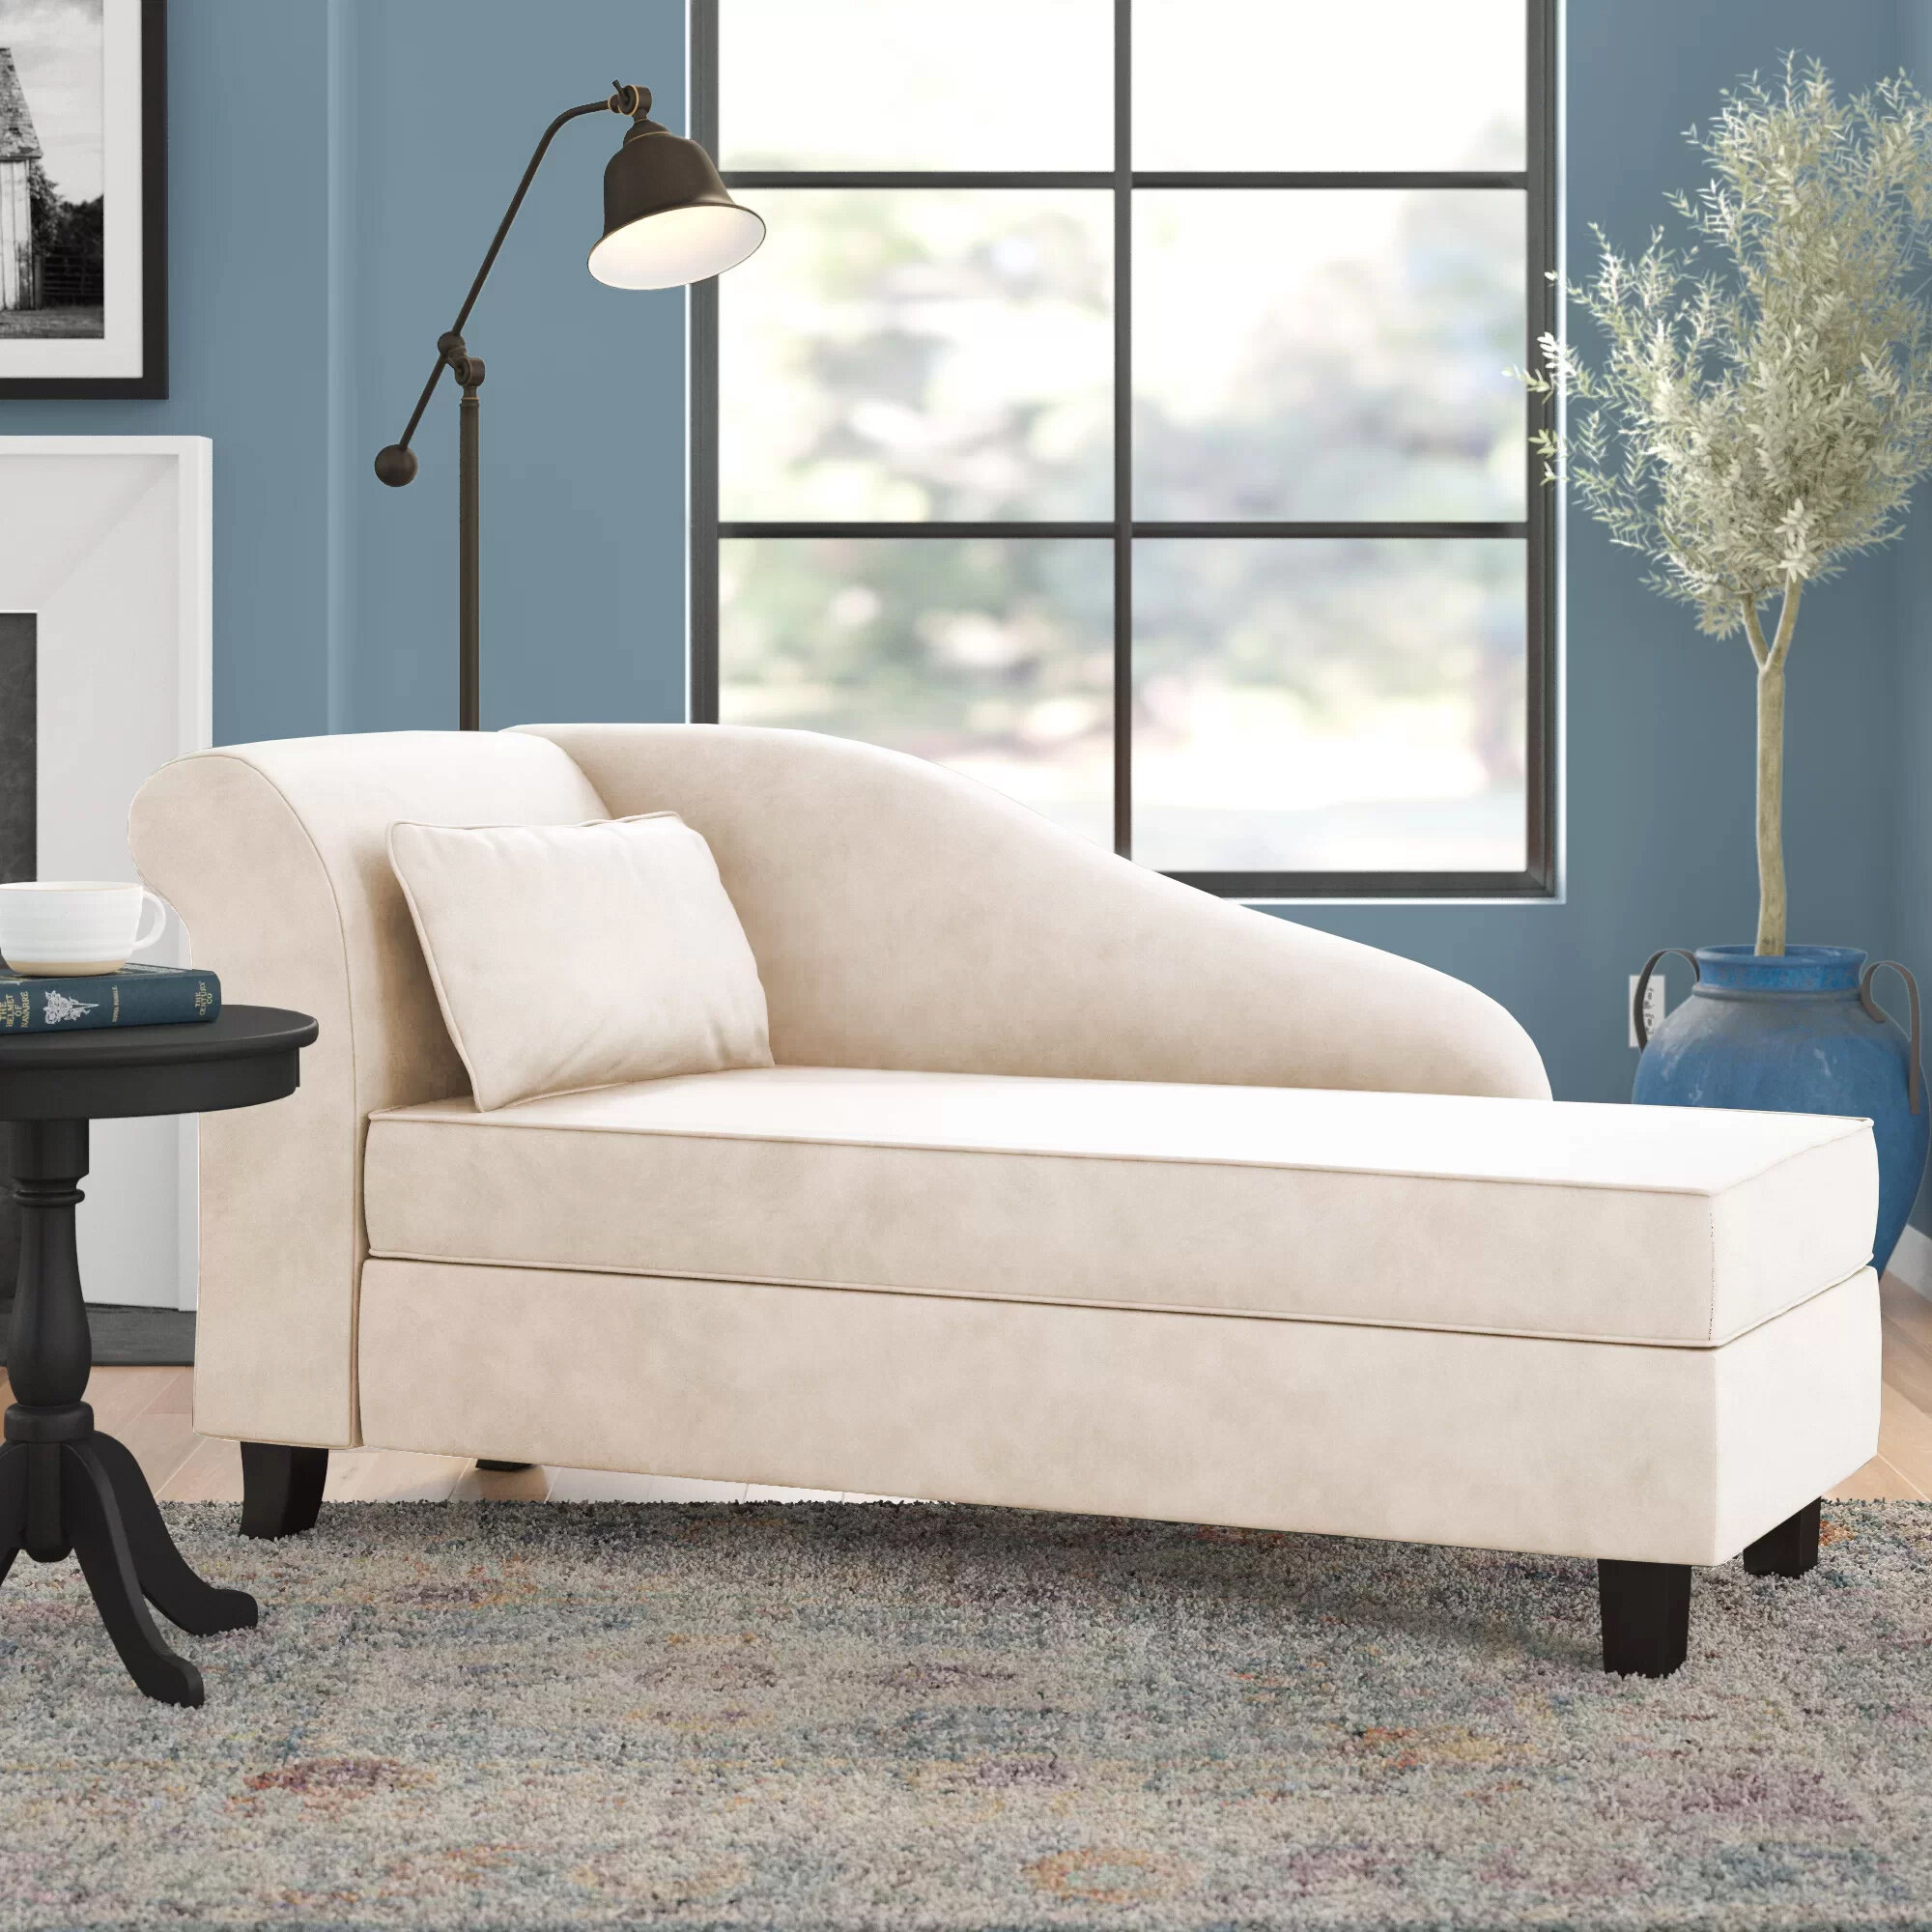 Verona One Left-Arm Chaise Flared Arms Chaise Lounge with Storage